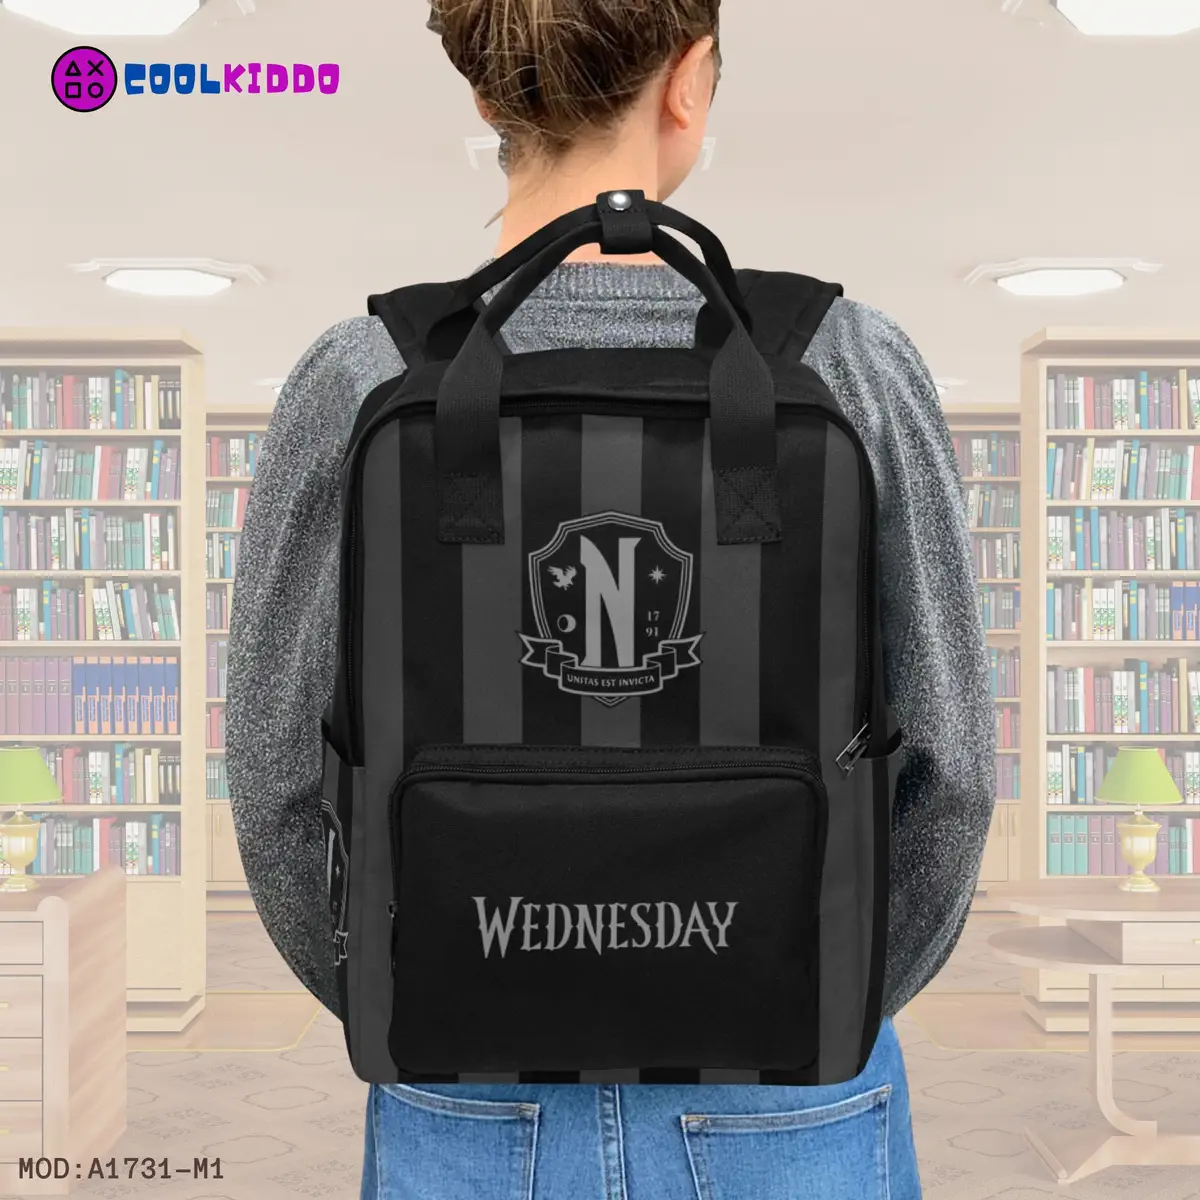 Wednesday Addams Uniform Inspired Backpack, Youth Book Bag for School, Nevermore Academy Rucksack Cool Kiddo 18